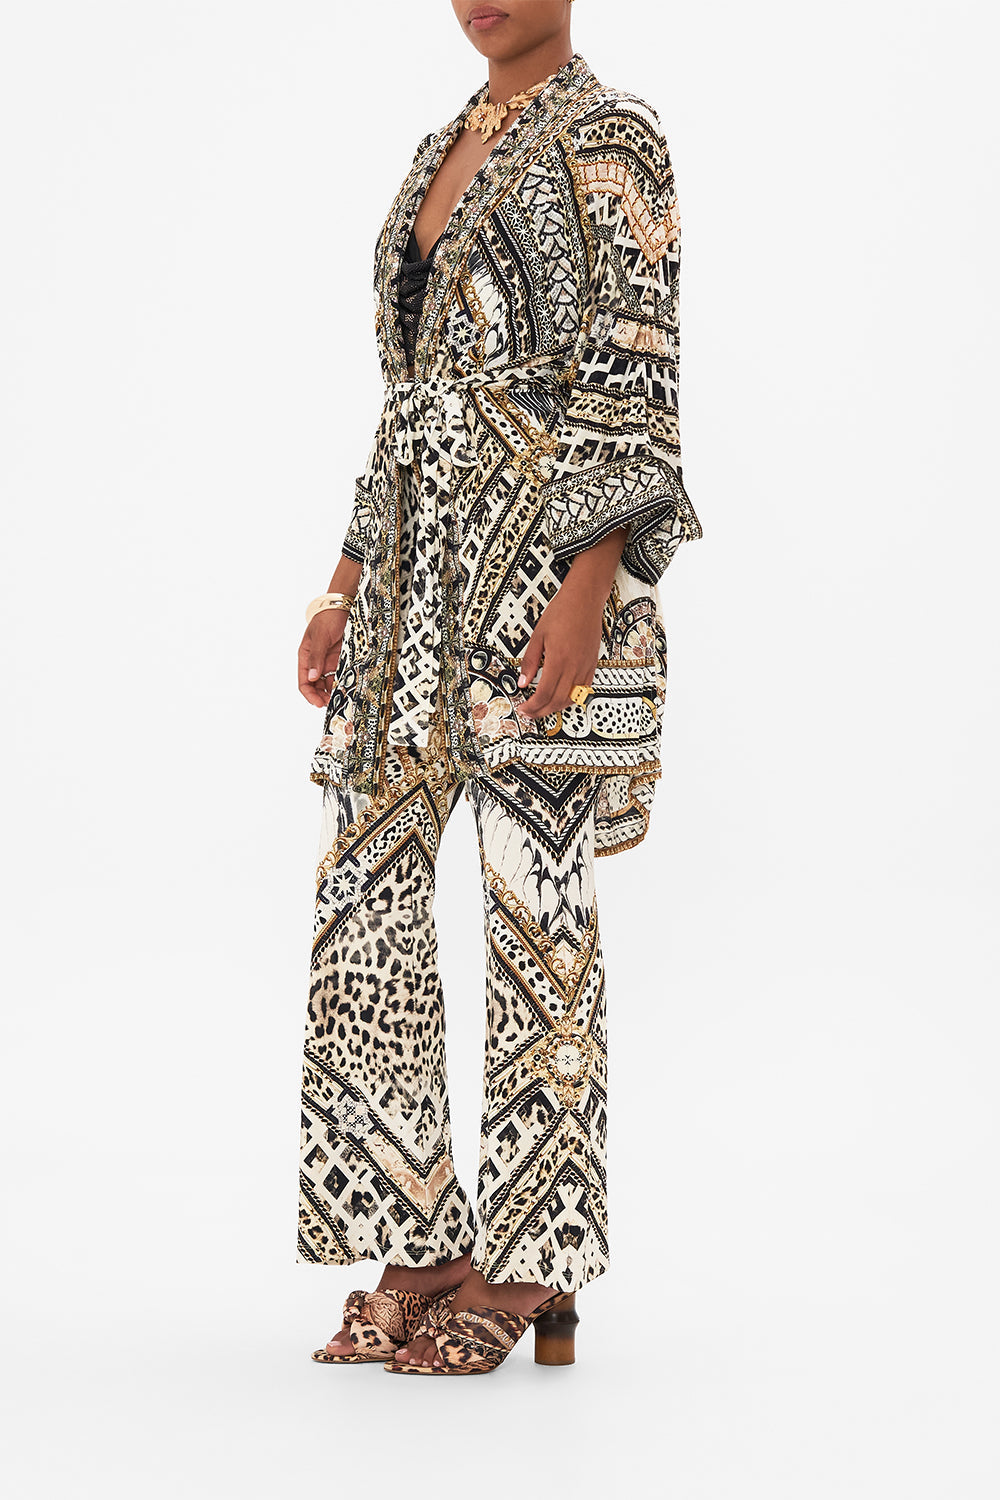 Side view of model wearing CAMILLA animal print robe in Mosaic Muse 